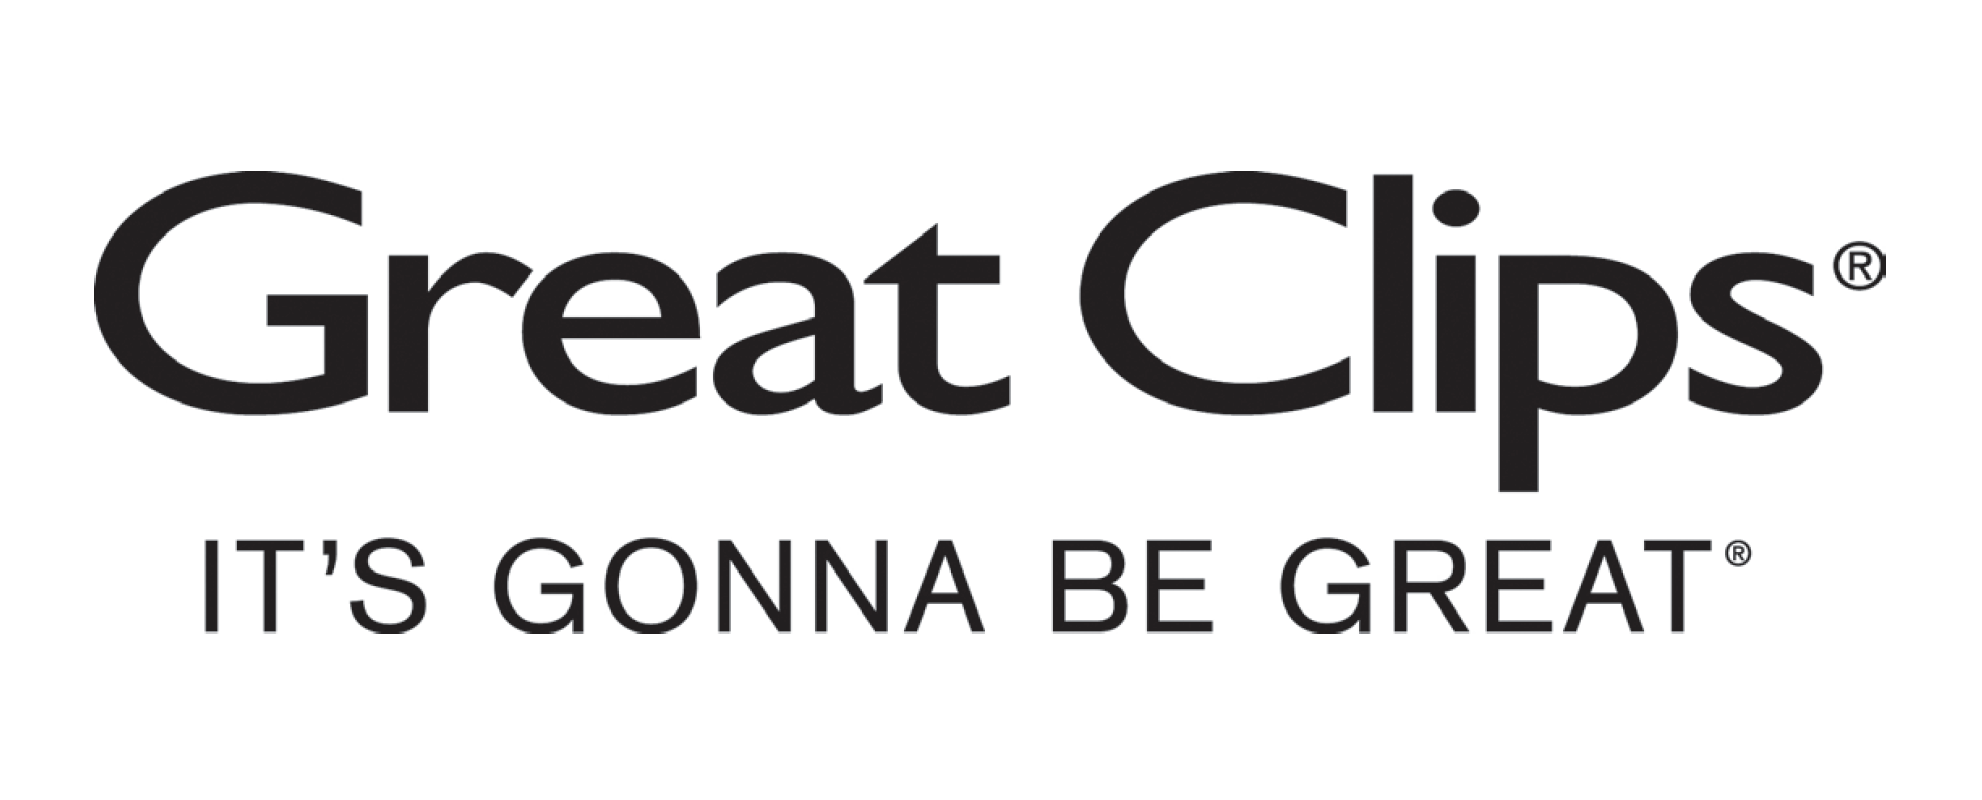 Great Clips logo.png